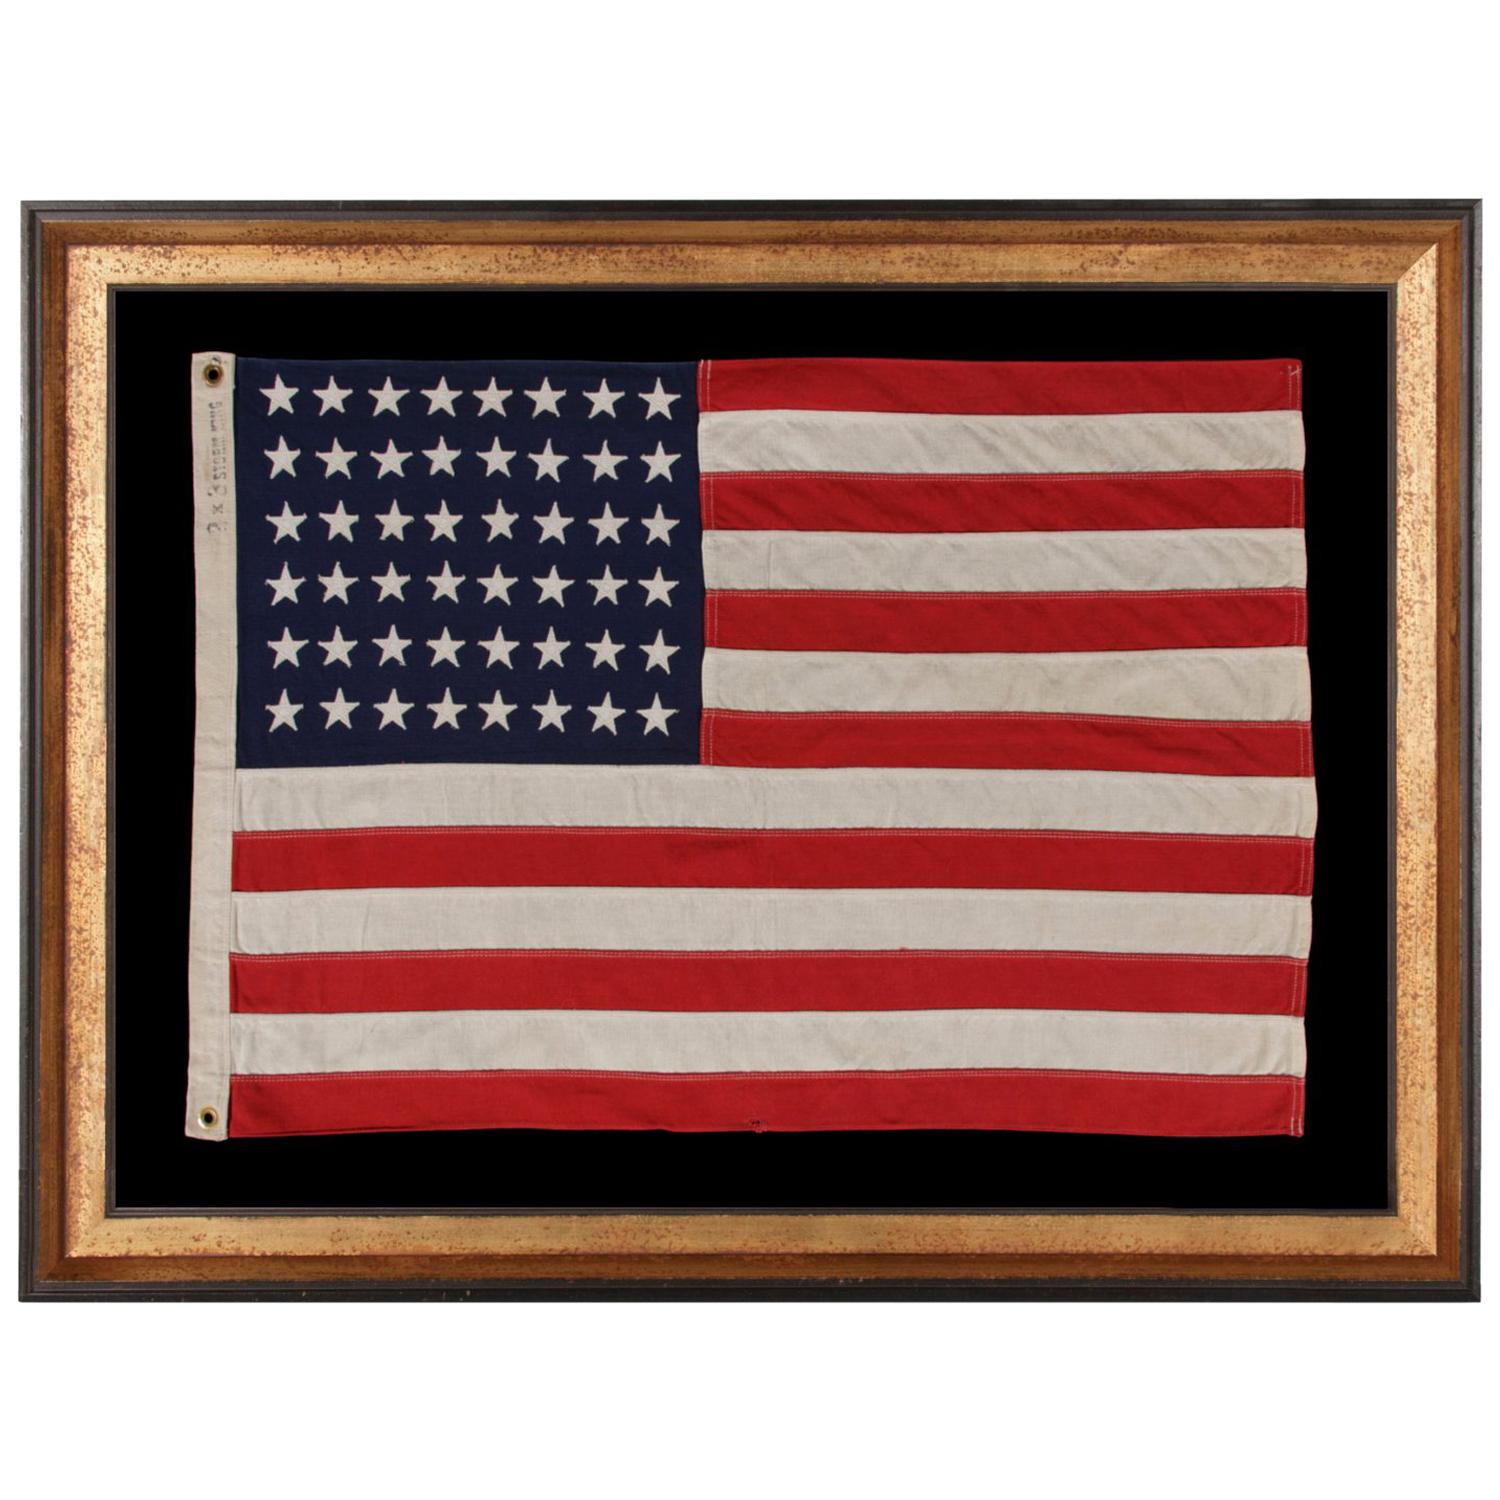 48 Stars on a Small-Scale Flag , Signed "Storm King"